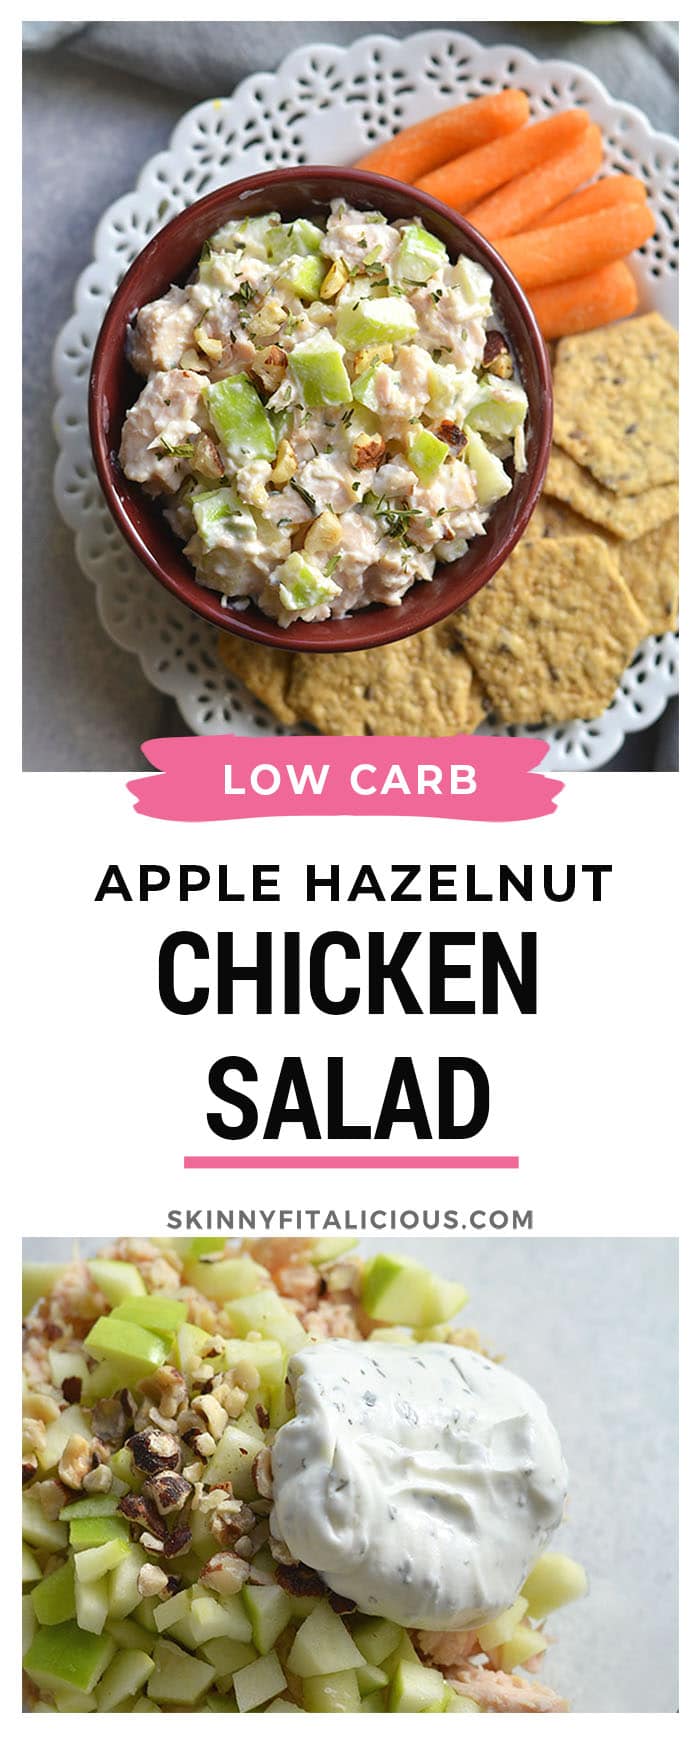 This Meal Prep Apple Hazelnut Chicken Salad is the perfect light, low carb lunch! Made mayo free, Paleo friendly and flavorful! Serve over lettuce, in a sandwich or wrap. An easy meal prep lunch you can take with you on the go! Low Carb + Gluten Free + Low Calorie + Paleo option